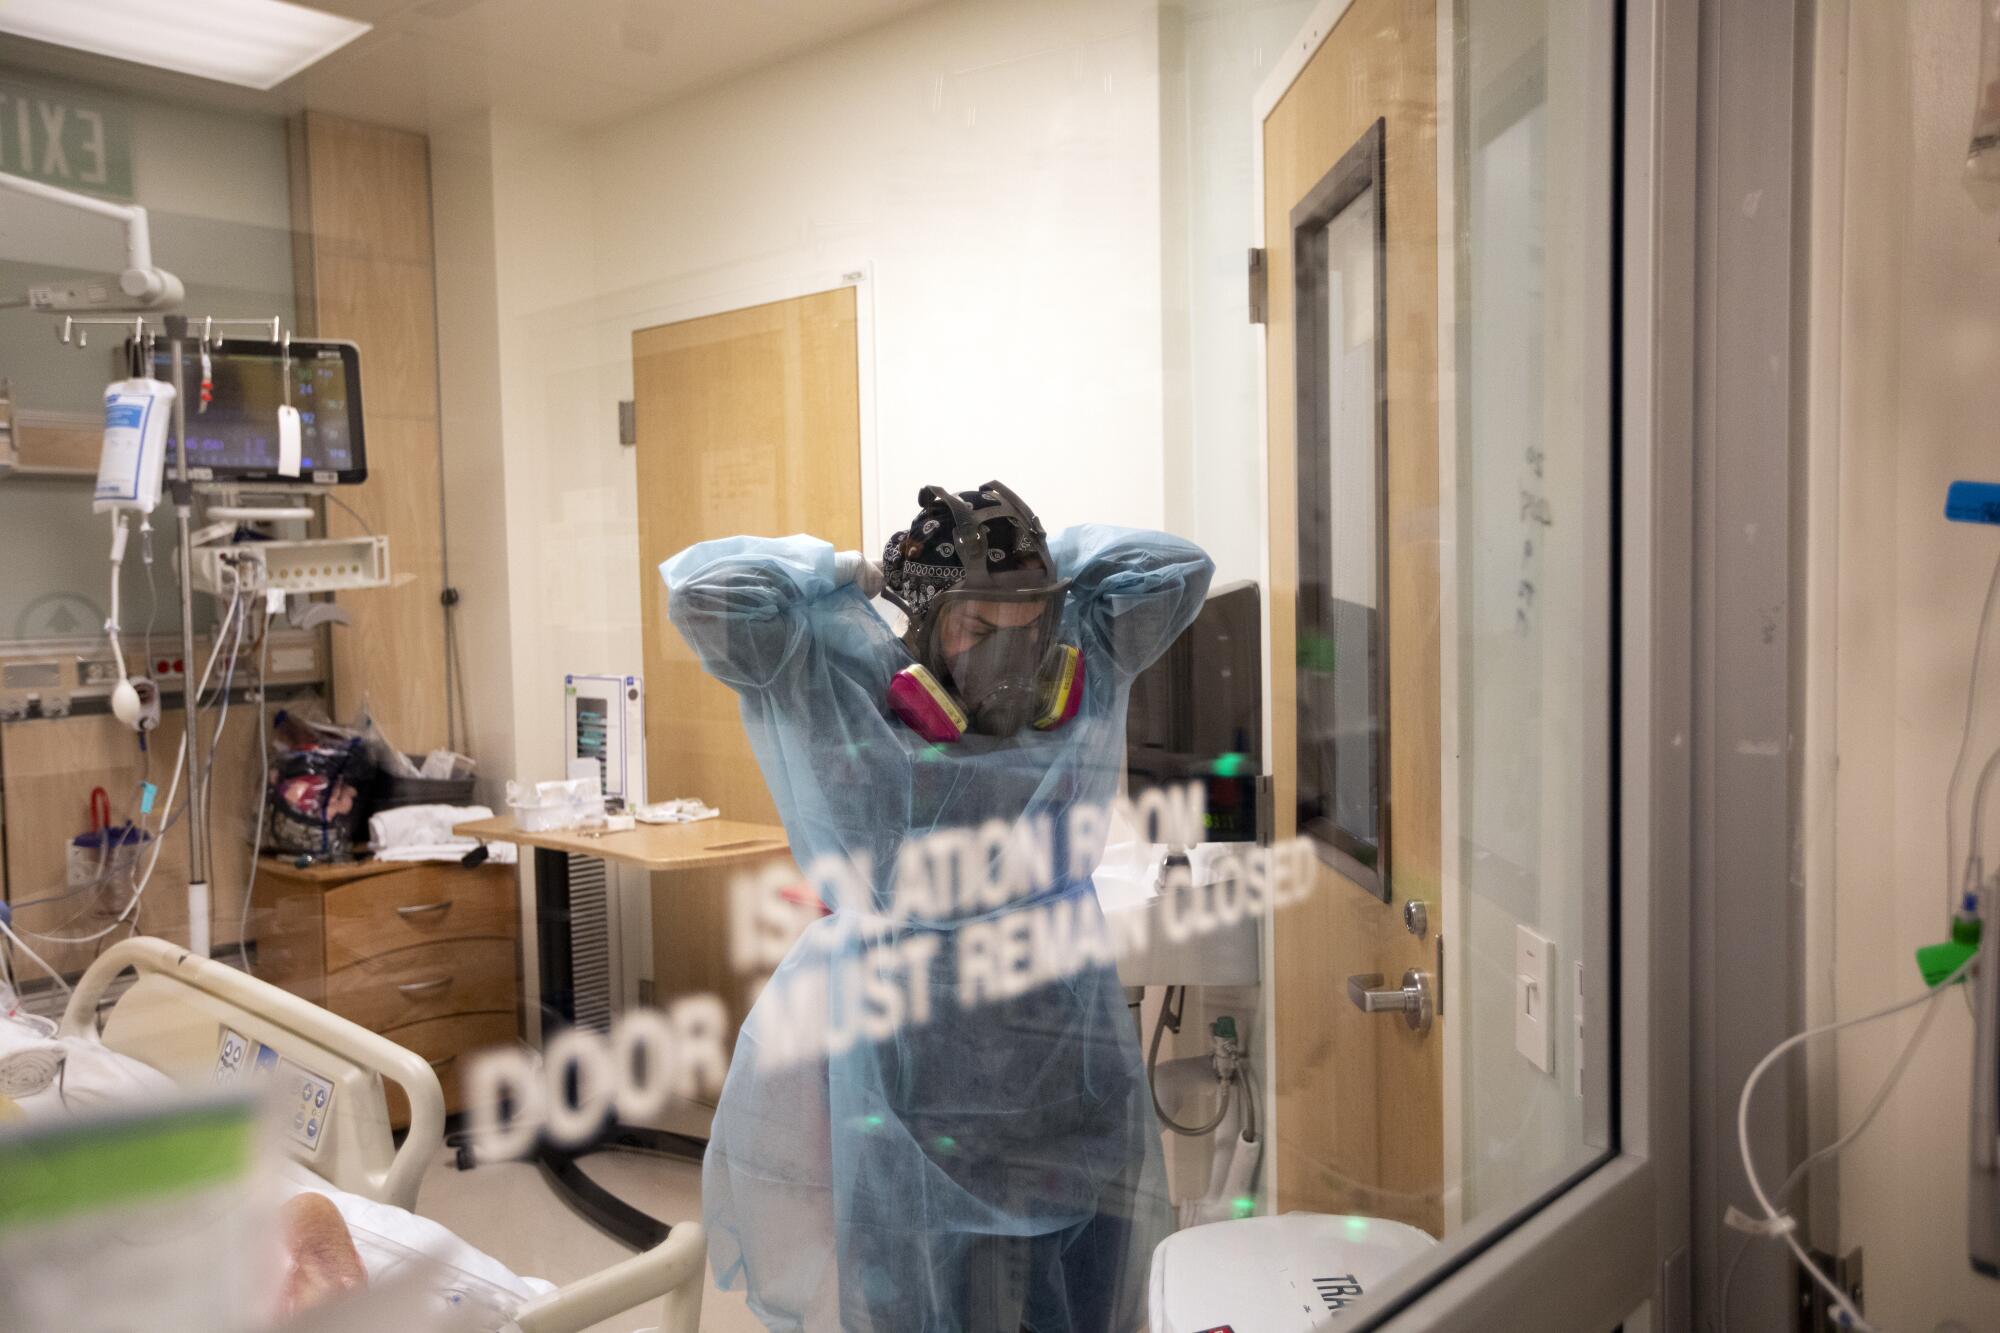 Nurse Armela Masihi removes her gown as she exits a COVID-19 patient's room at Martin Luther King Jr. Community Hospital.